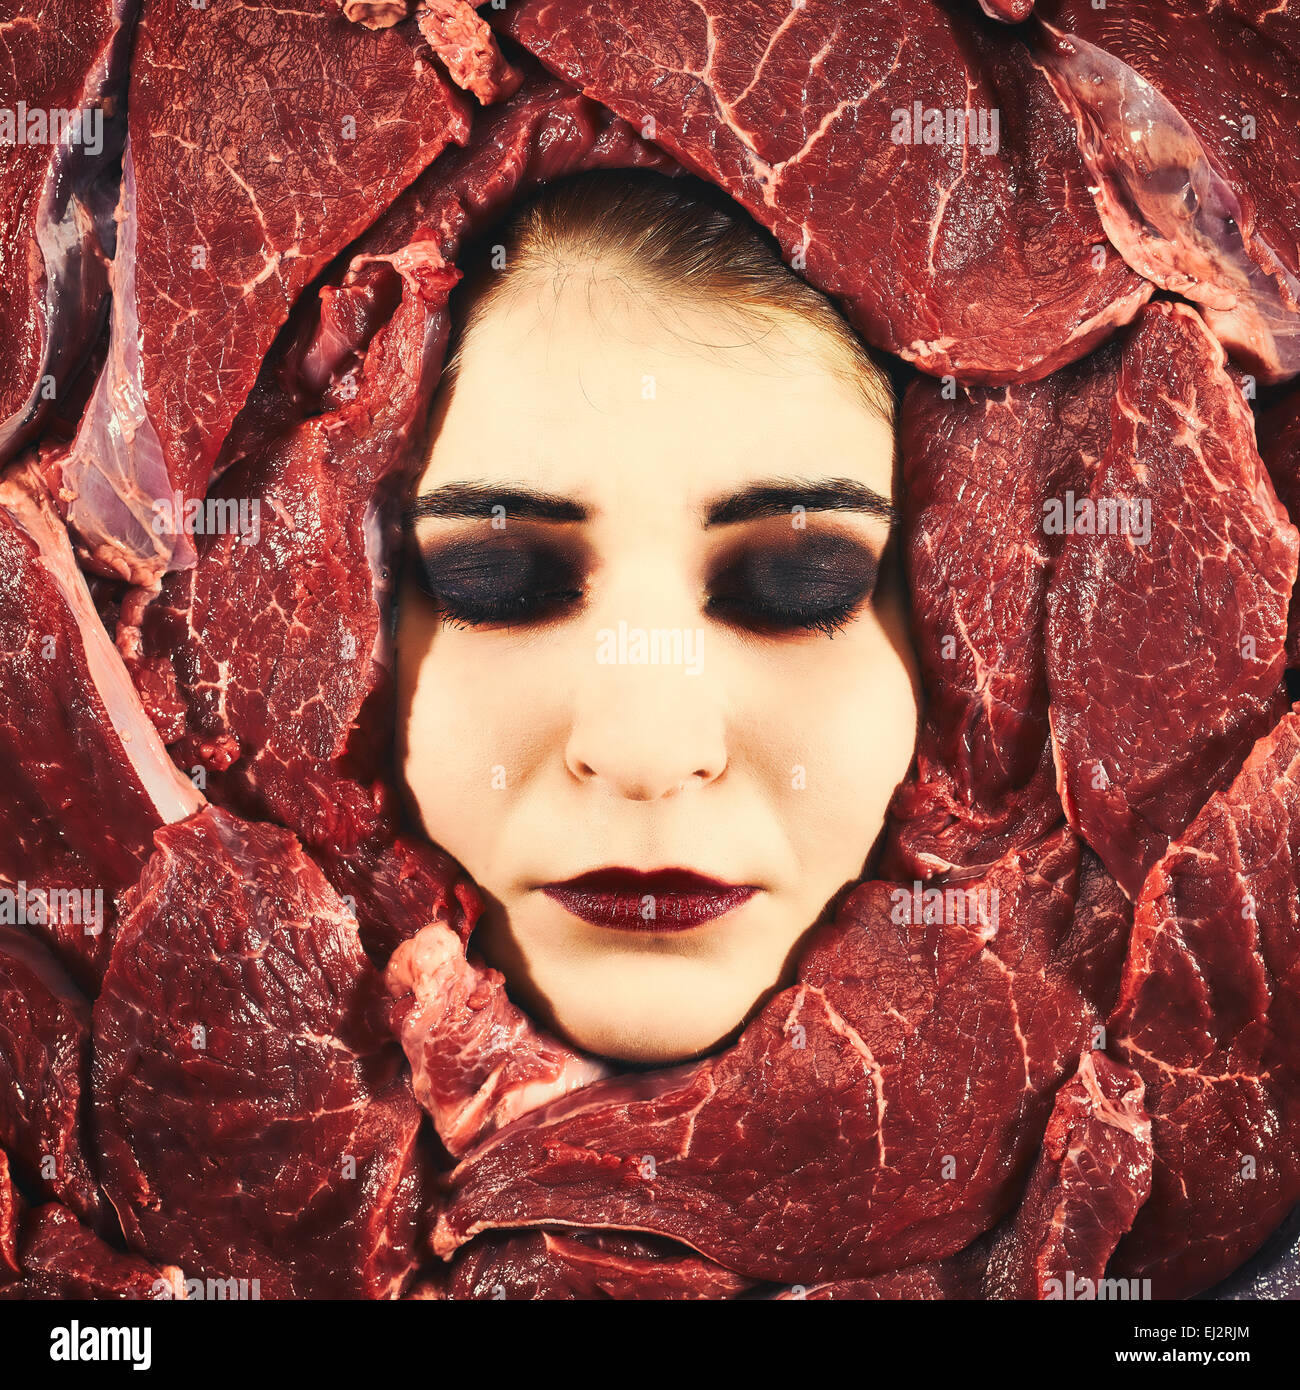 Beautiful woman expression face with beef frame, cross-processed image Stock Photo